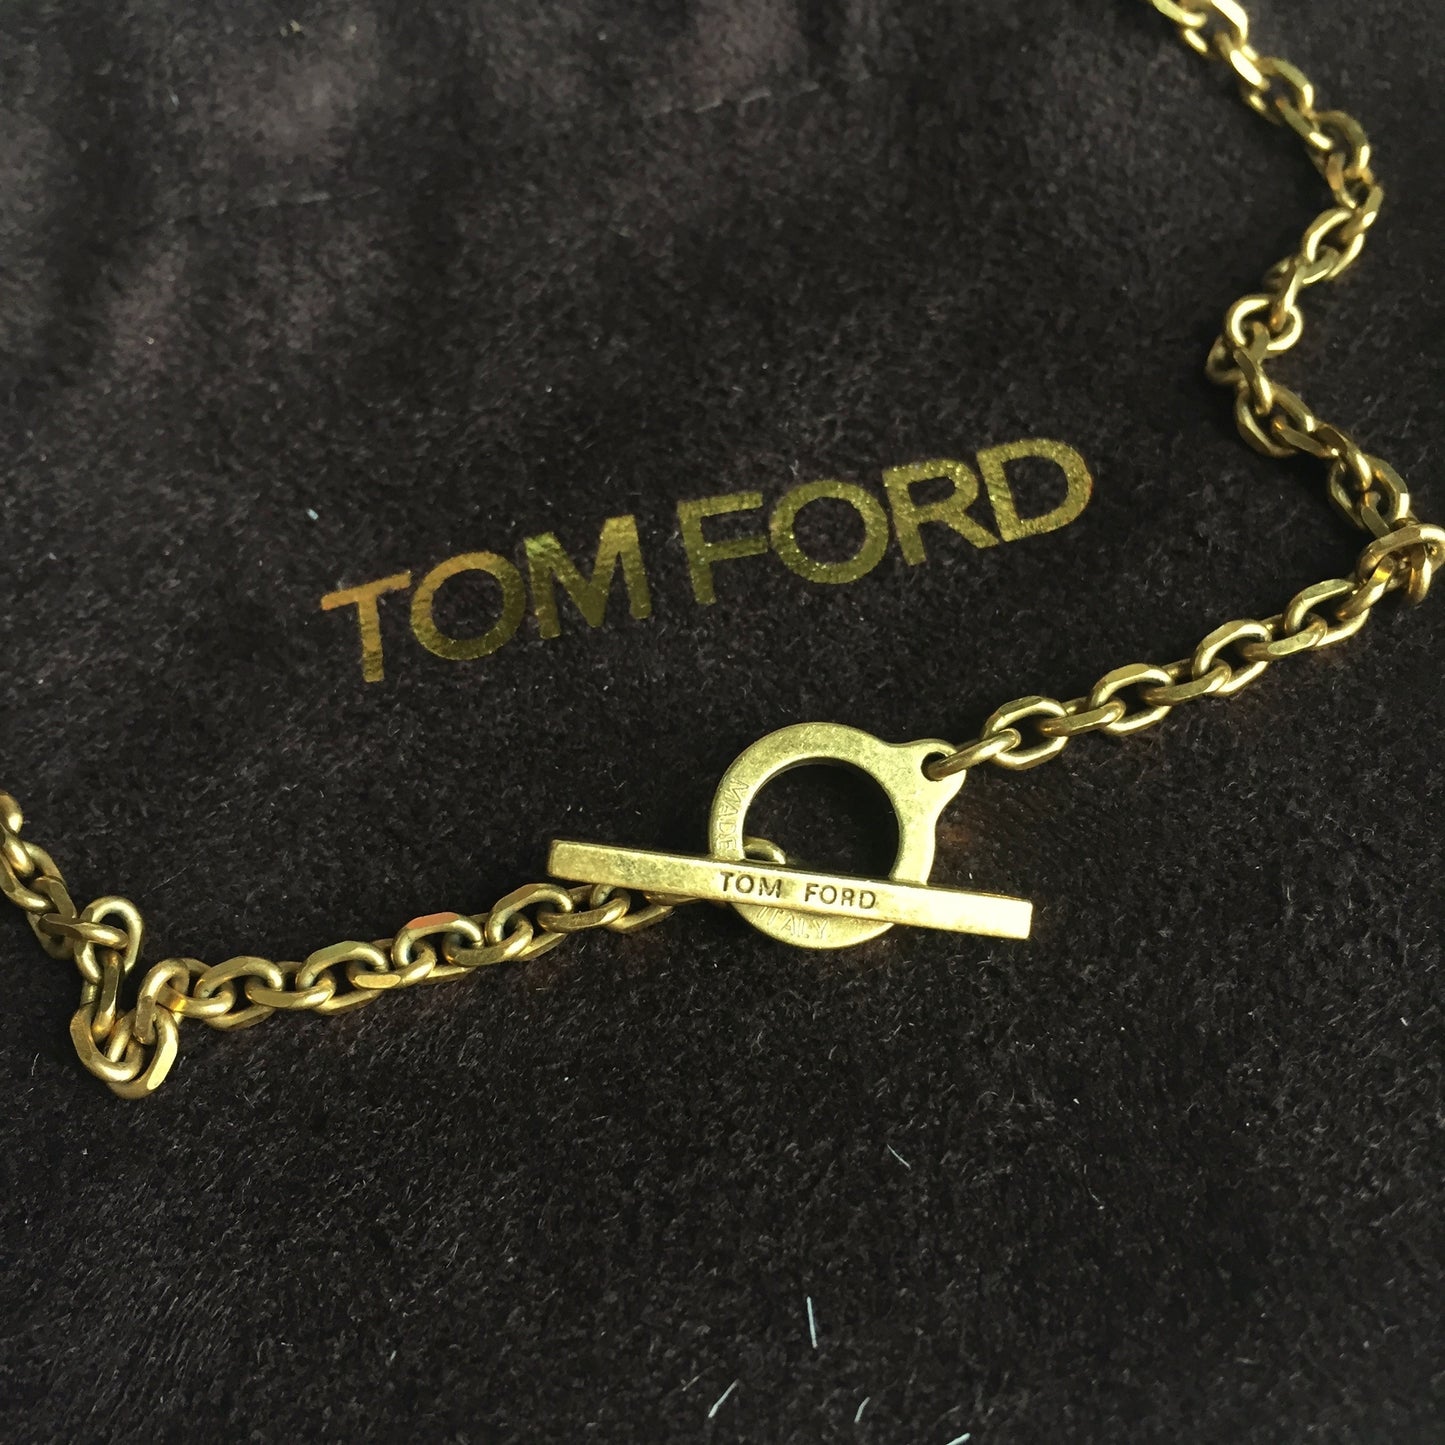 Tom Ford - Gold Feather Pendant Chain Necklace